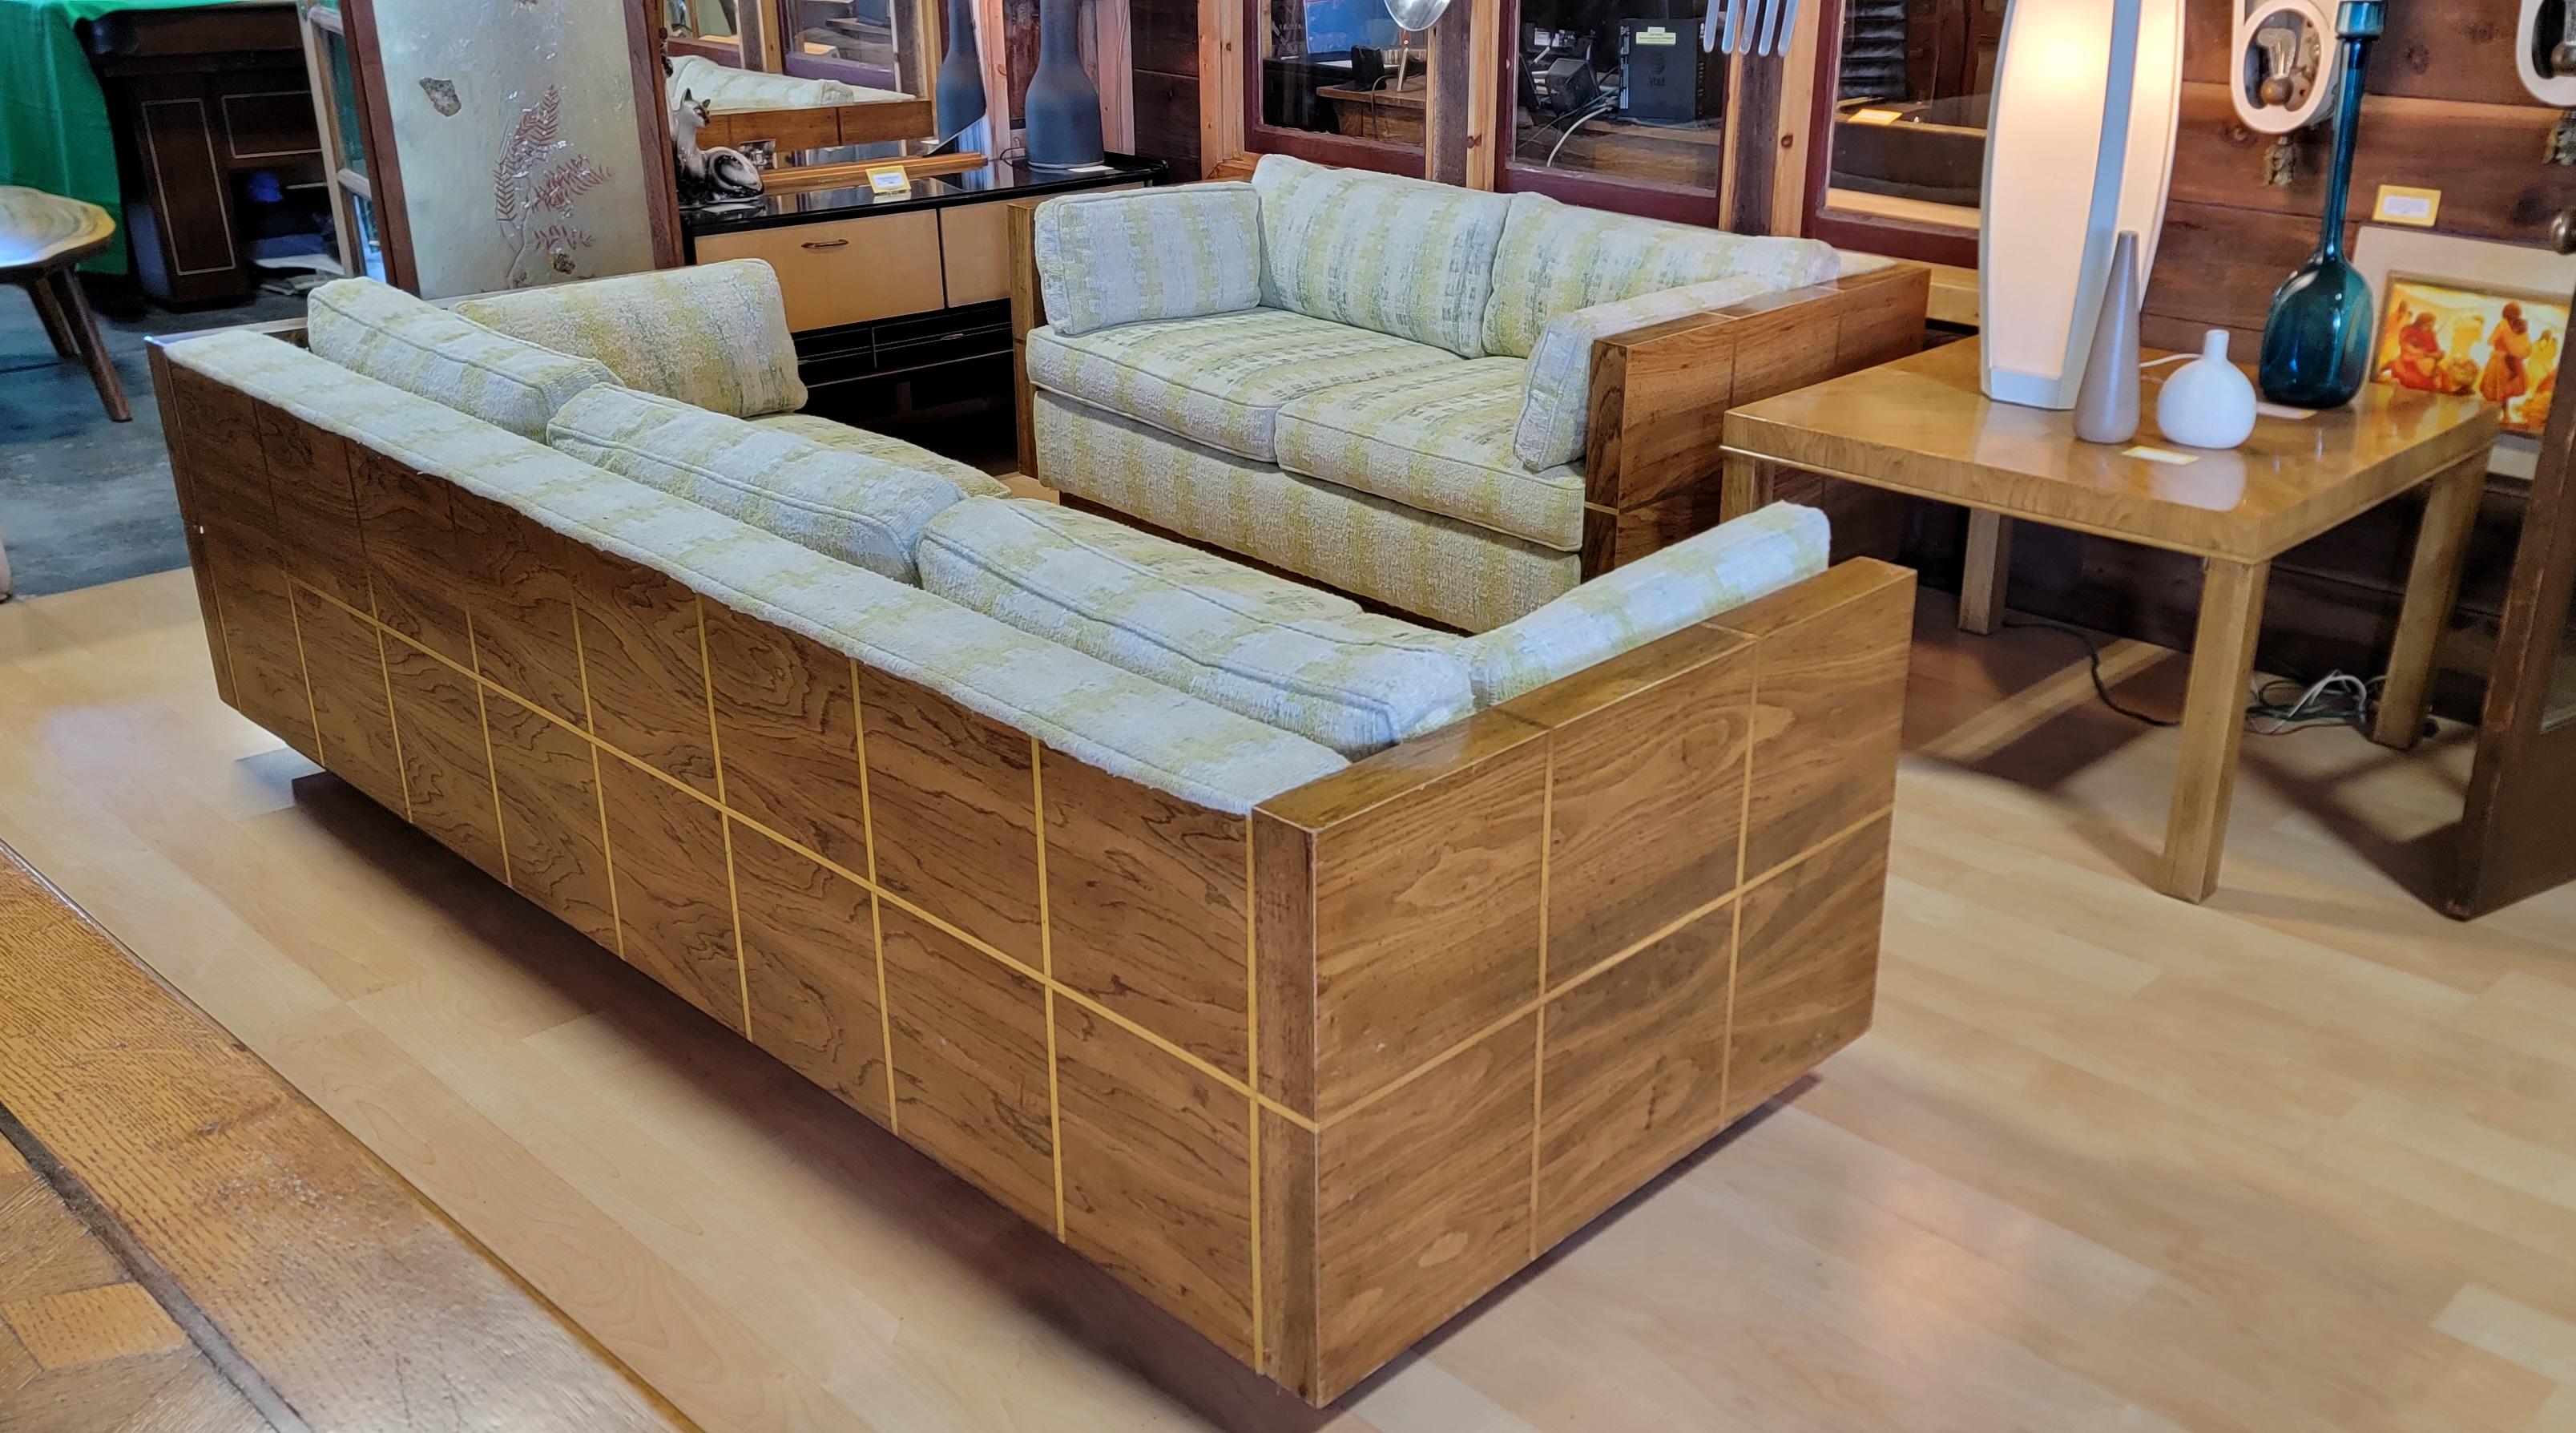 Matching sofa and loveseat by Bernhardt Furniture Company. Circa. 1970's. Designed in the manner of Milo Baughman. Nice addition to a Hollywood Regency or Mid-Century Modern interior. Very good original condition with original upholstery. Original